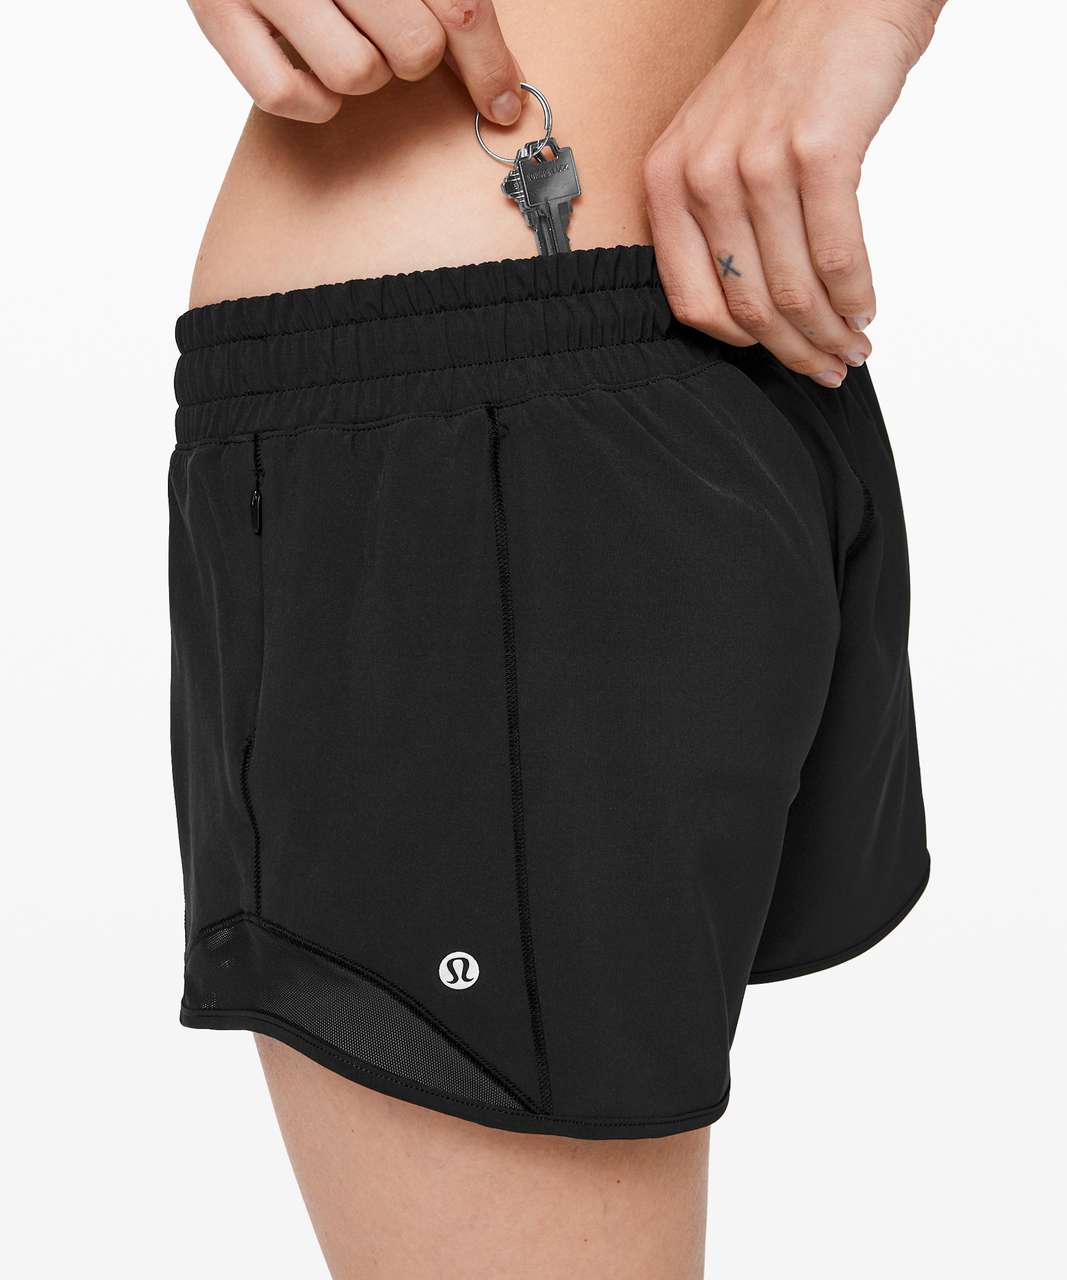 I cut out the liner of my Hotty Hot shorts 😼 : r/lululemon